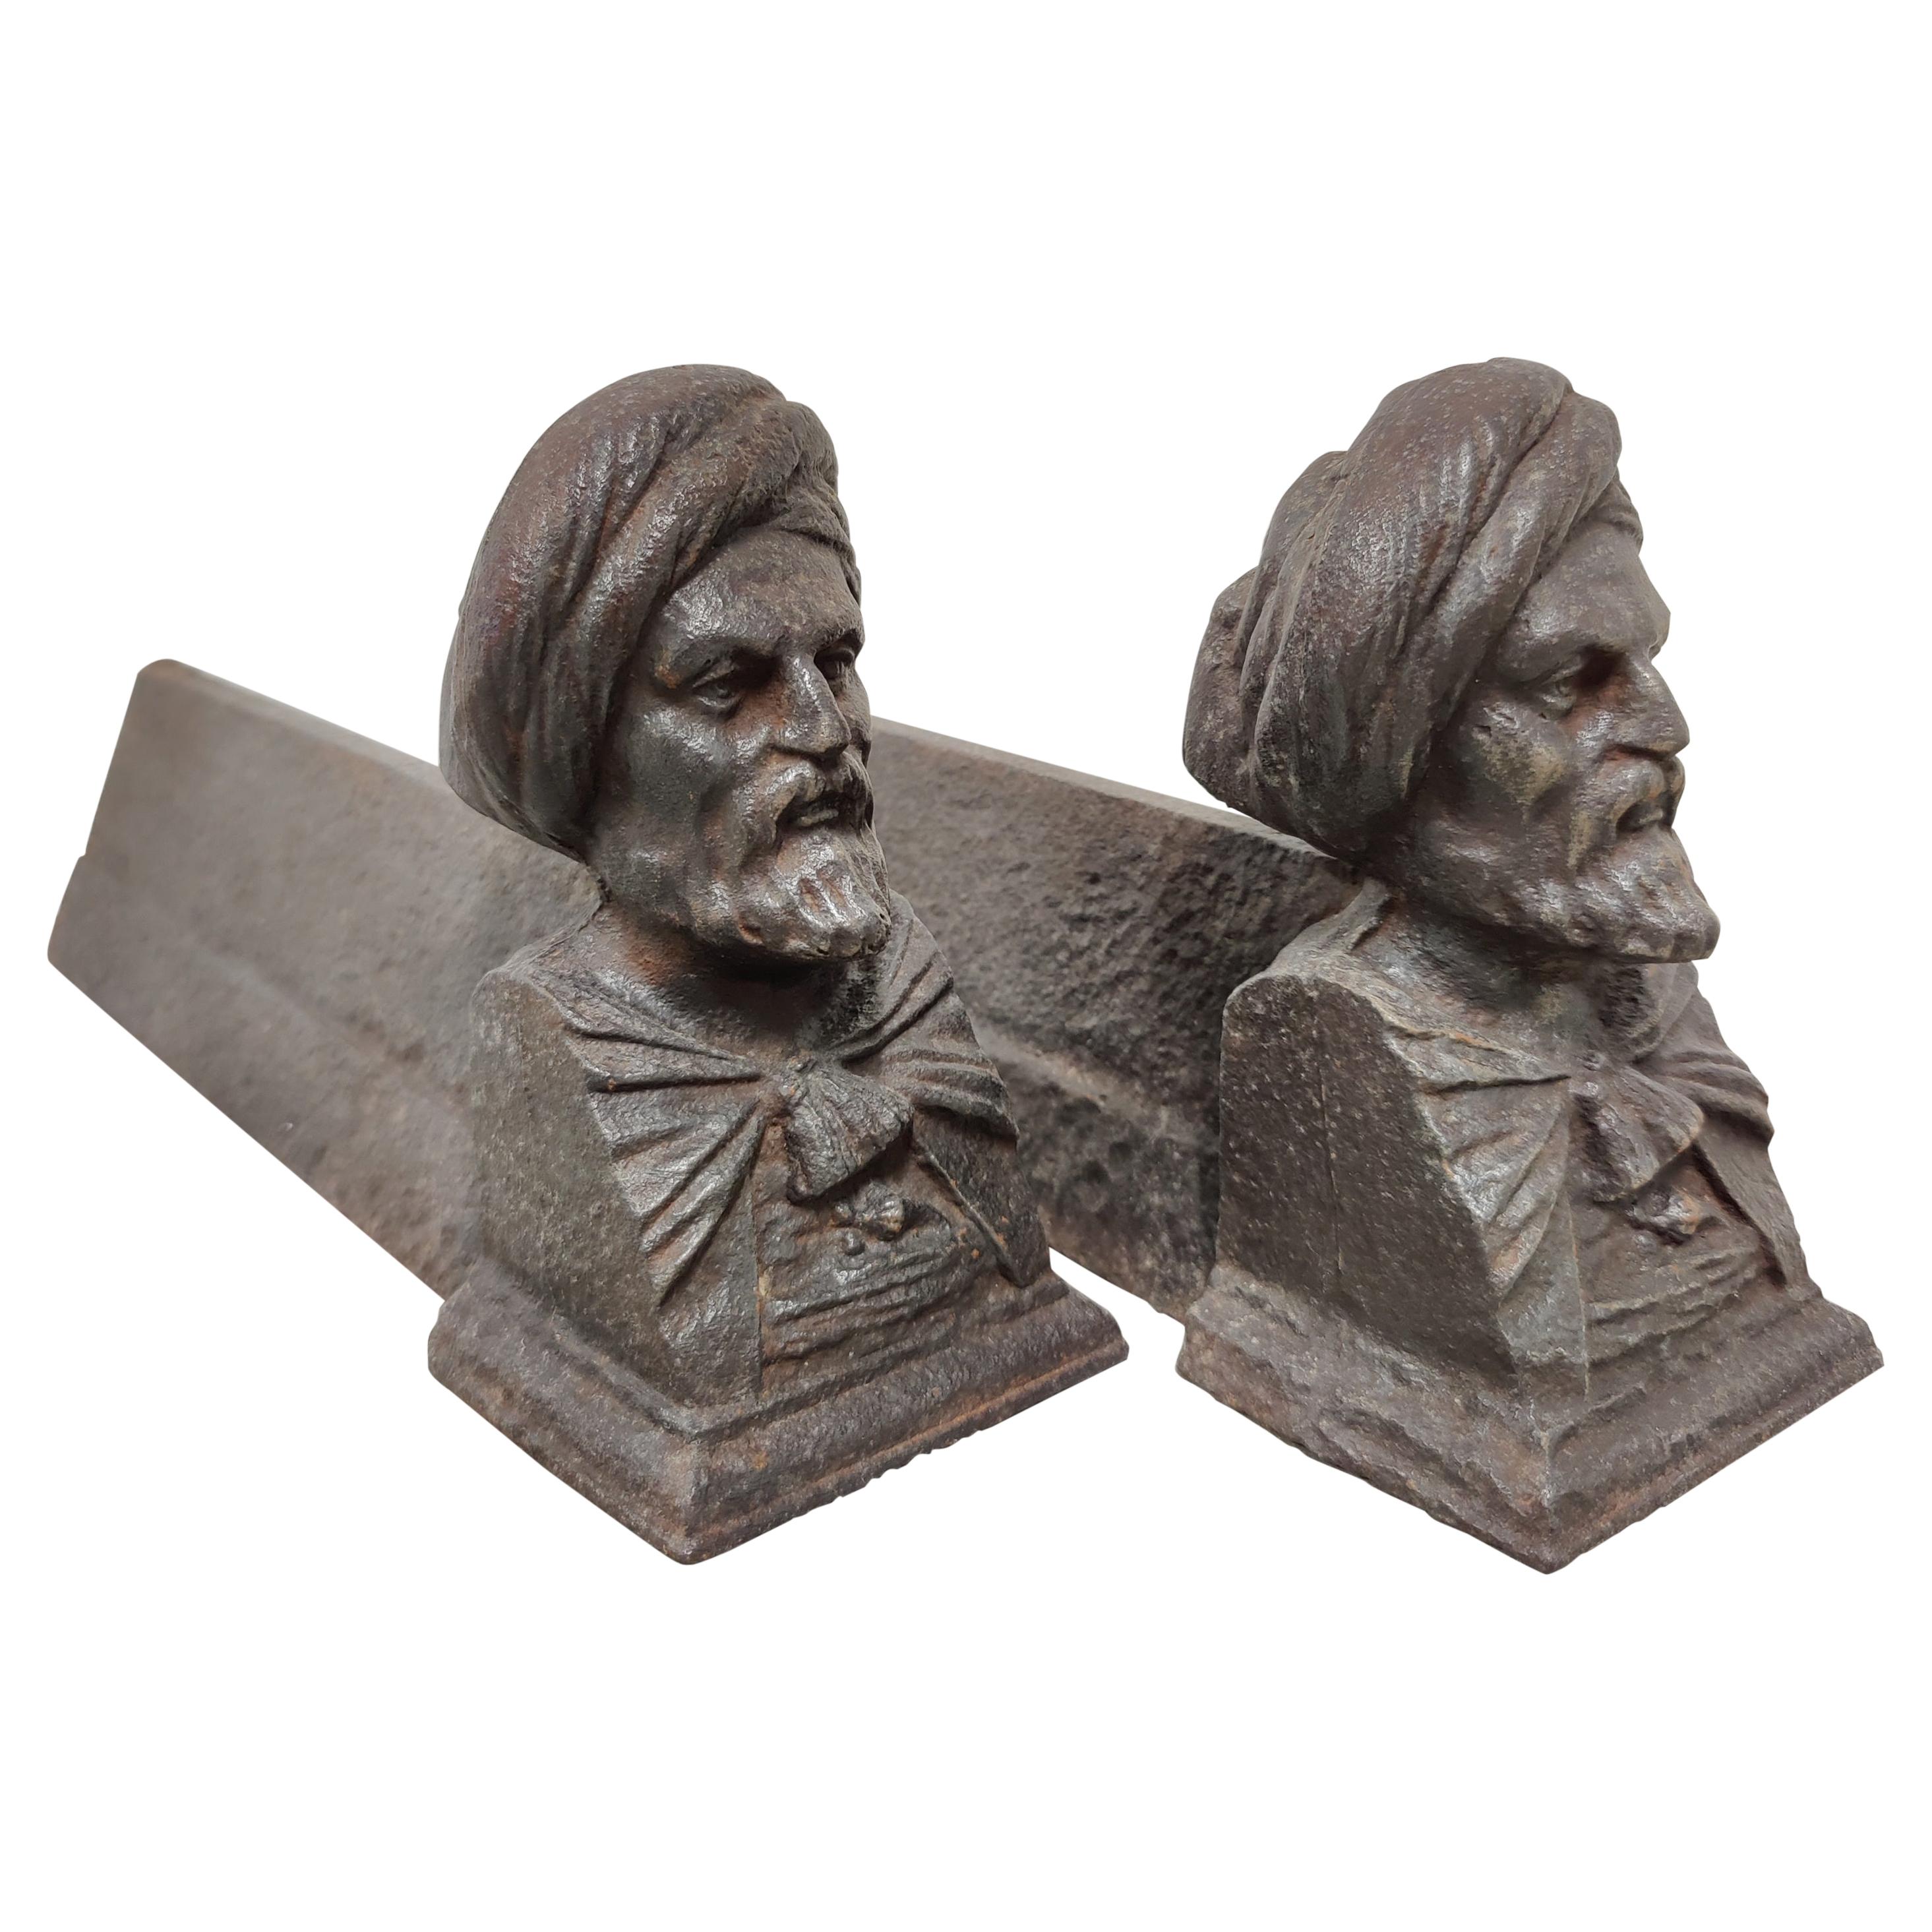 Man with a Turban, Andirons / Fire Dogs For Sale